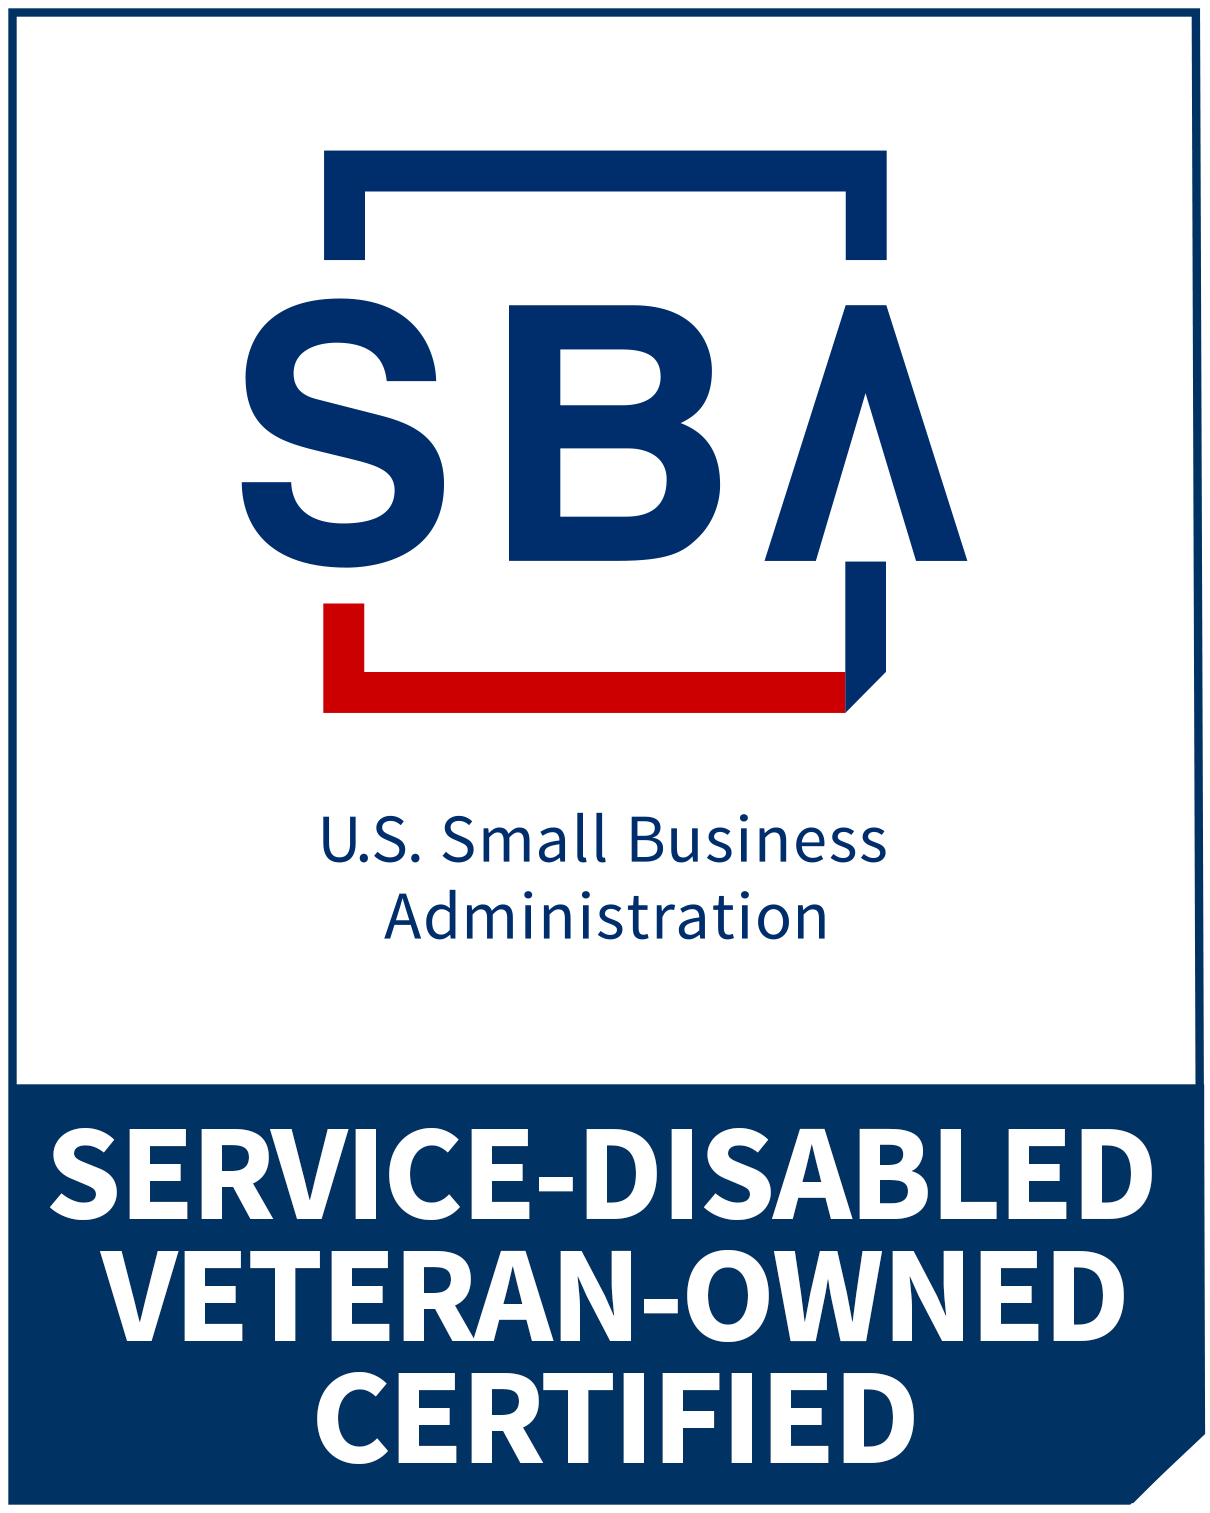 SBA Certificate of Service Disabled Veteran Owned Small Business